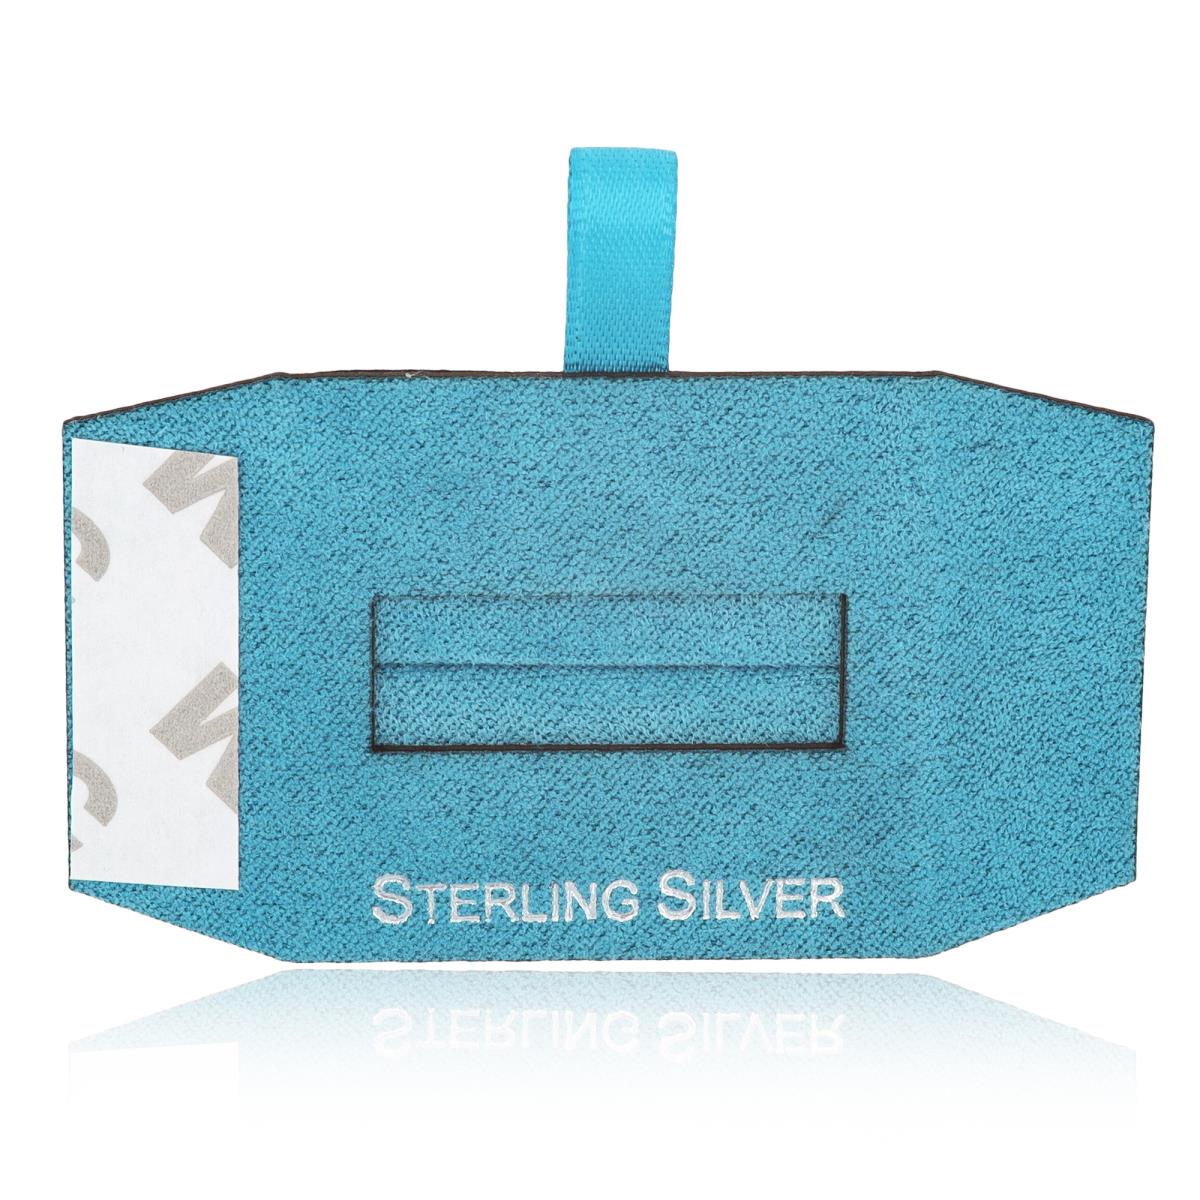 Teal Sterling Silver, Silver Foil Ring Insert (Box B06-159/Teal/D)